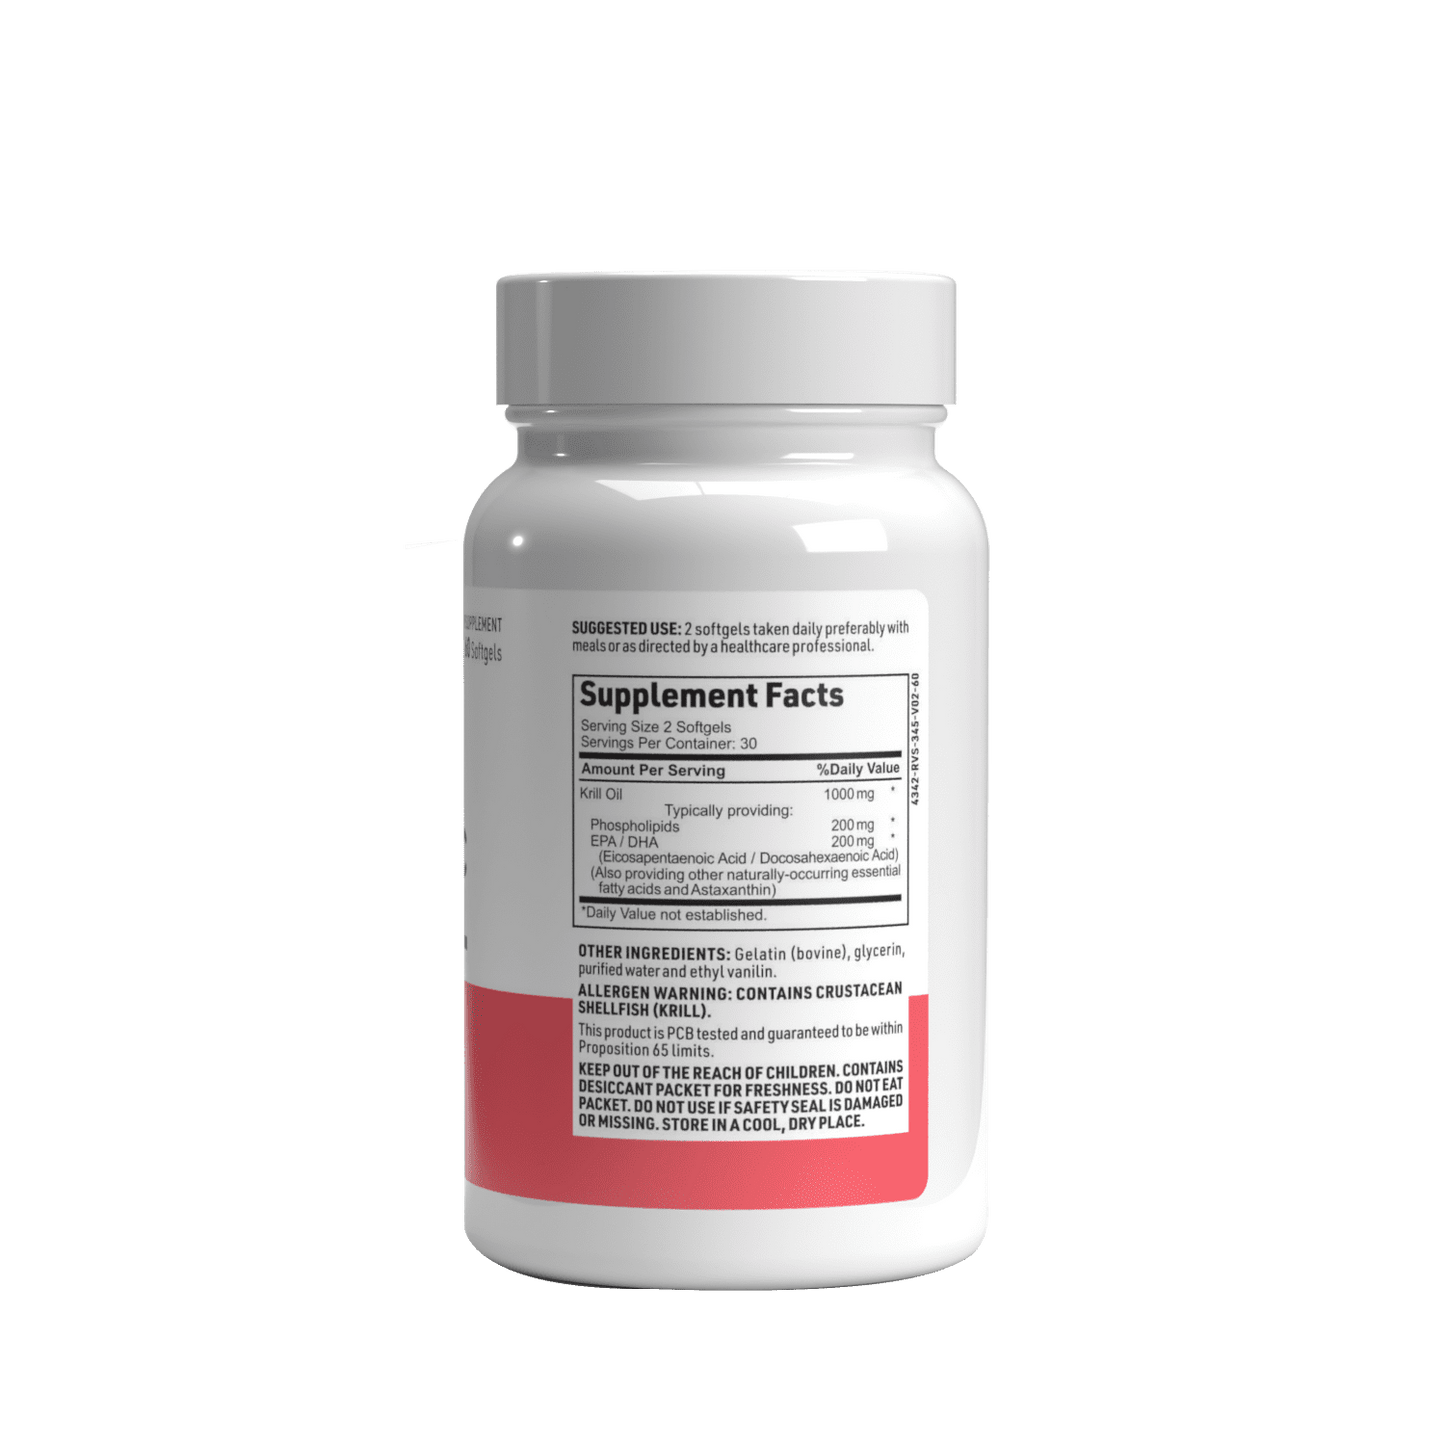 Antarctic Krill Oil Supplements facts